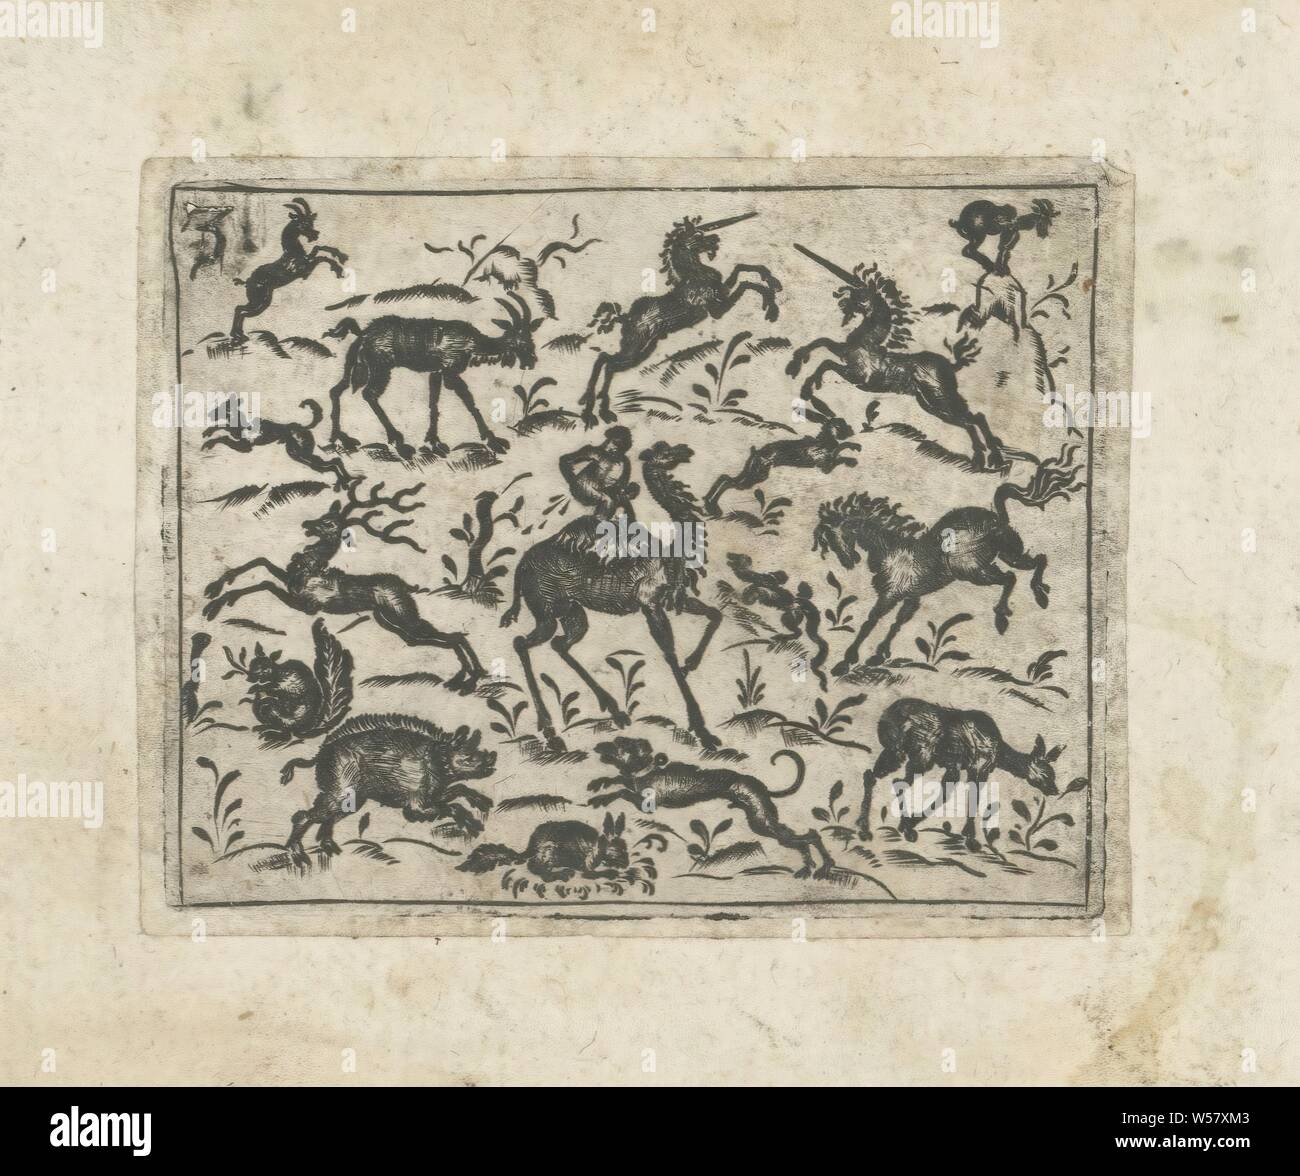 Black ornament with animals, Flat decoration in black work with land animals. In the middle a camel with a monkey on its back. In addition, a unicorn, dog, rabbit, squirrel, deer, goat, goat and horse and boar. Numbered top left: 3. The print is part of an album, ornaments, art, animals, hoofed animals: camel, anonymous, 1551 - 1650, paper, engraving, h 49 mm × w 62 mm Stock Photo